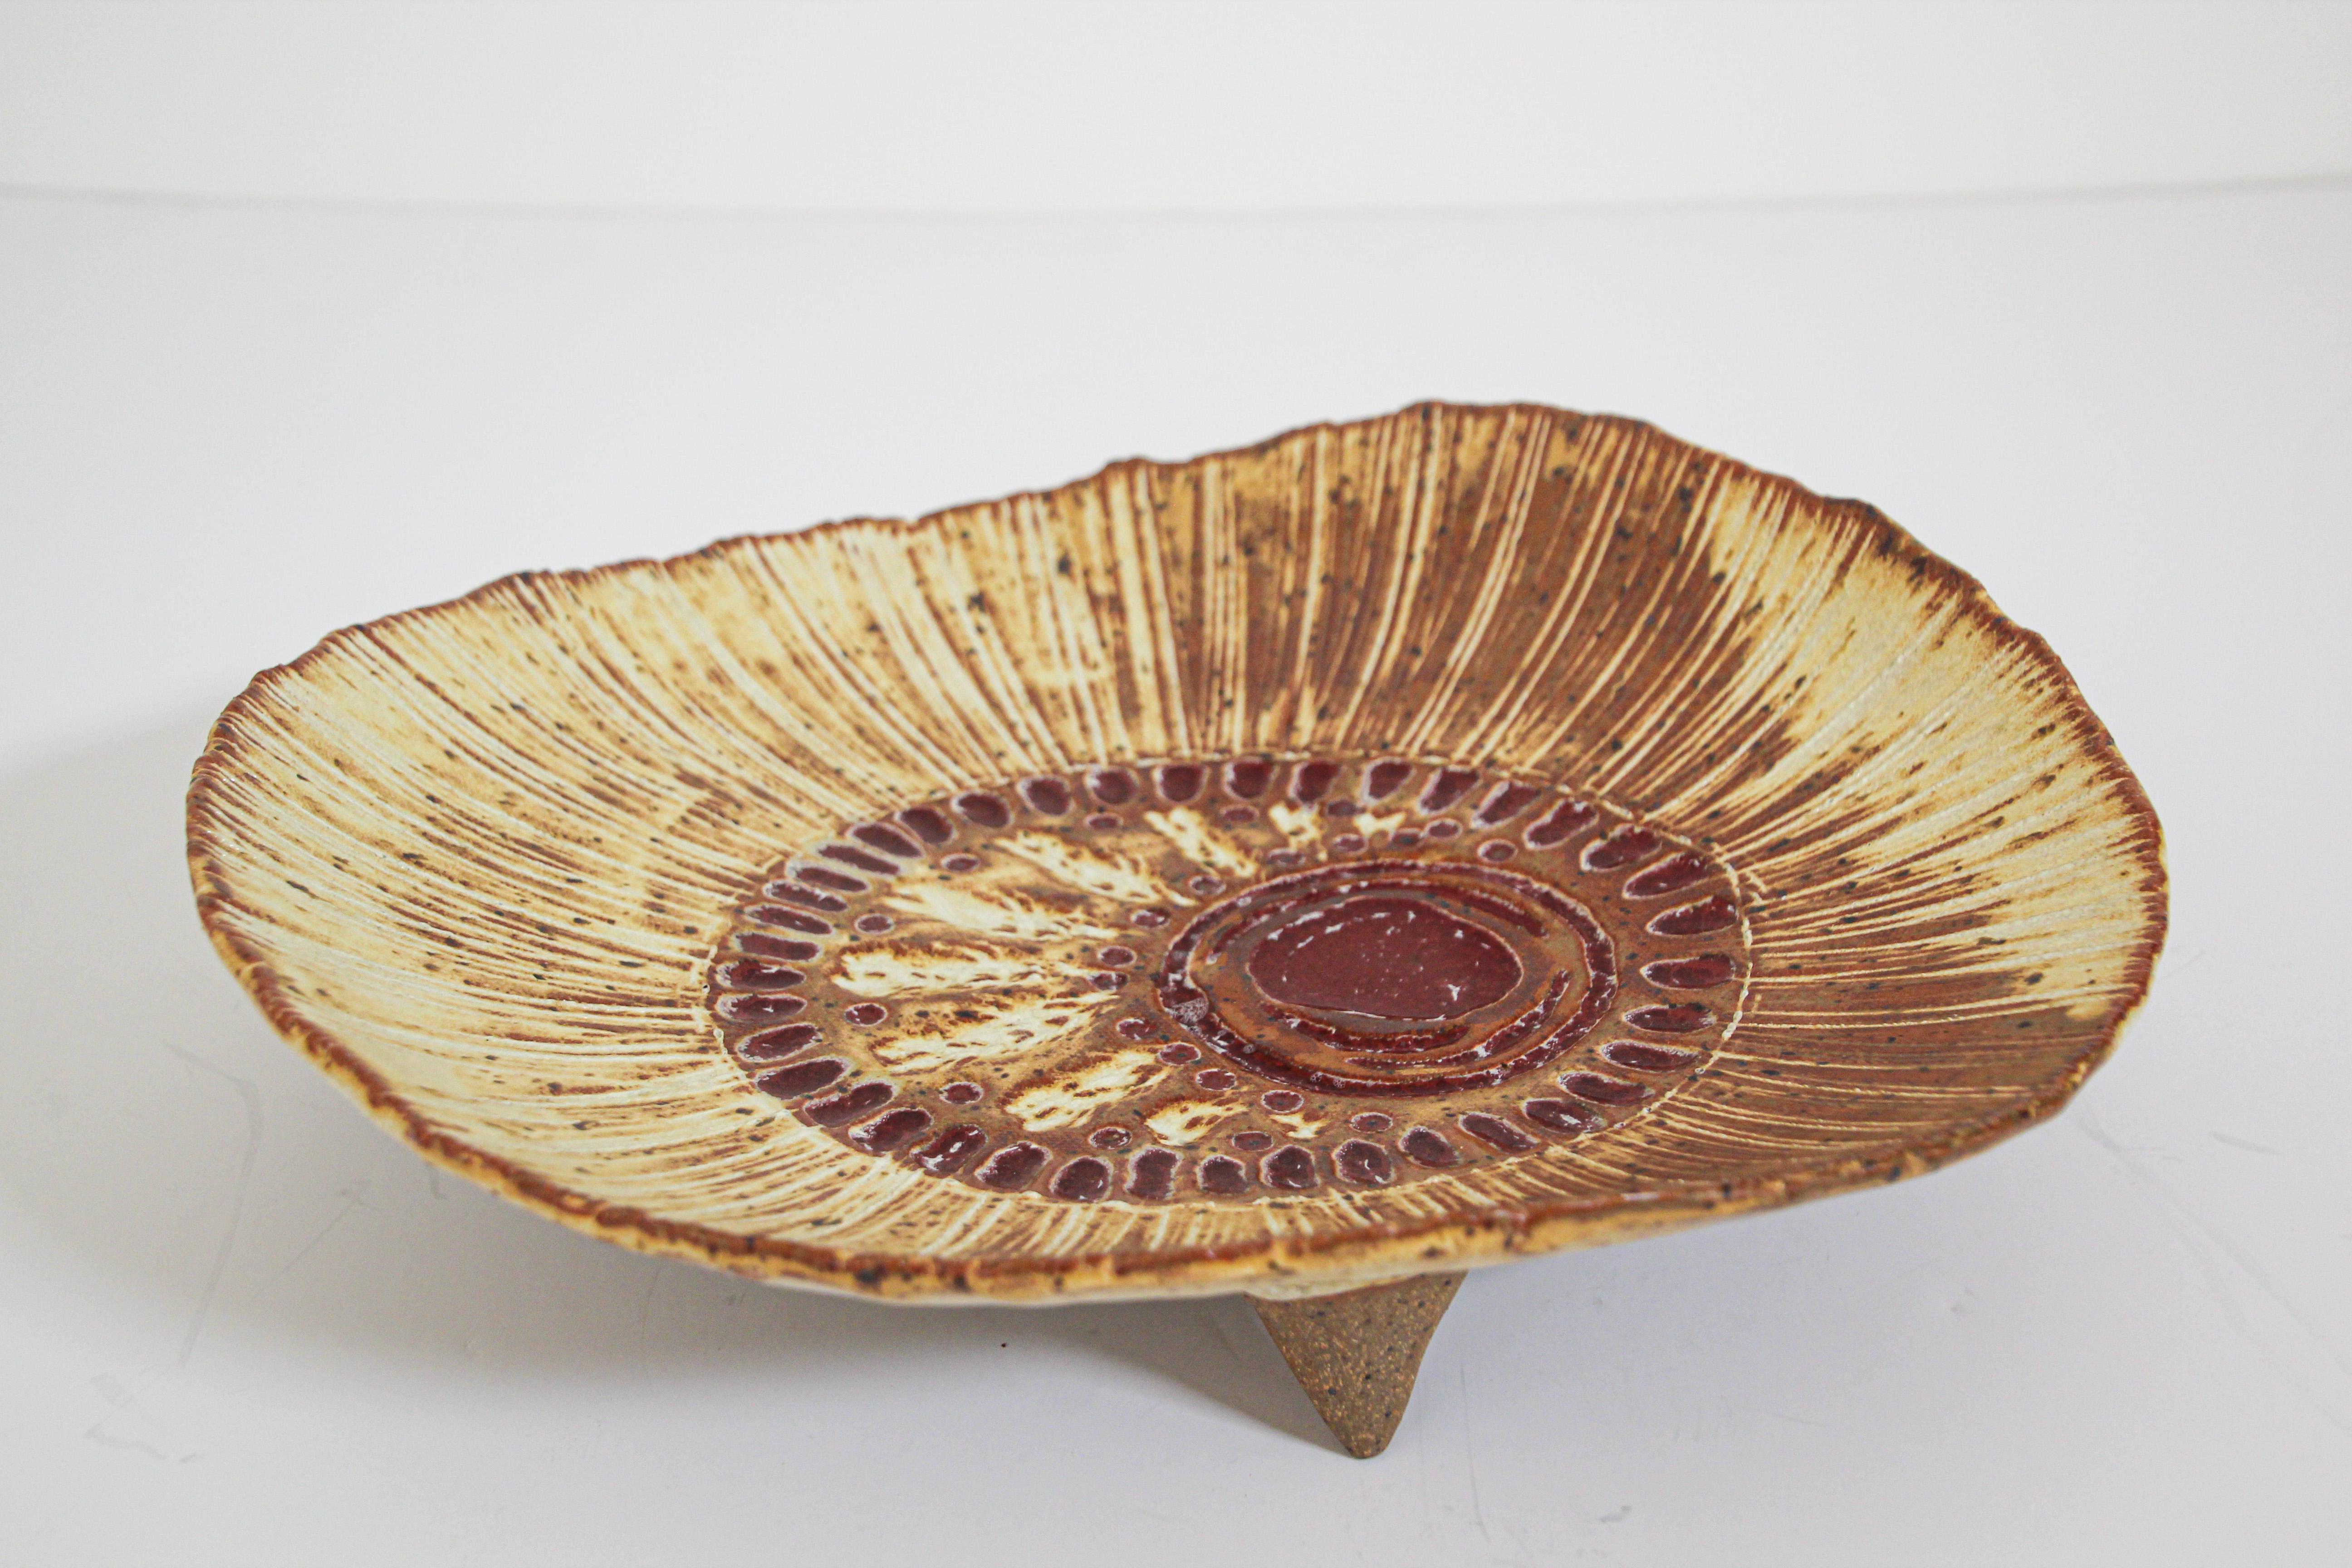 1960s Mid-Century Modern handcrafted and hand-decorated large Freeform footed plate.
Hand-painted stoneware decorative plate with Classic sandy fat lava glaze.
This ceramics was known to collectors as 'fat lava' and were made during the 1960s and